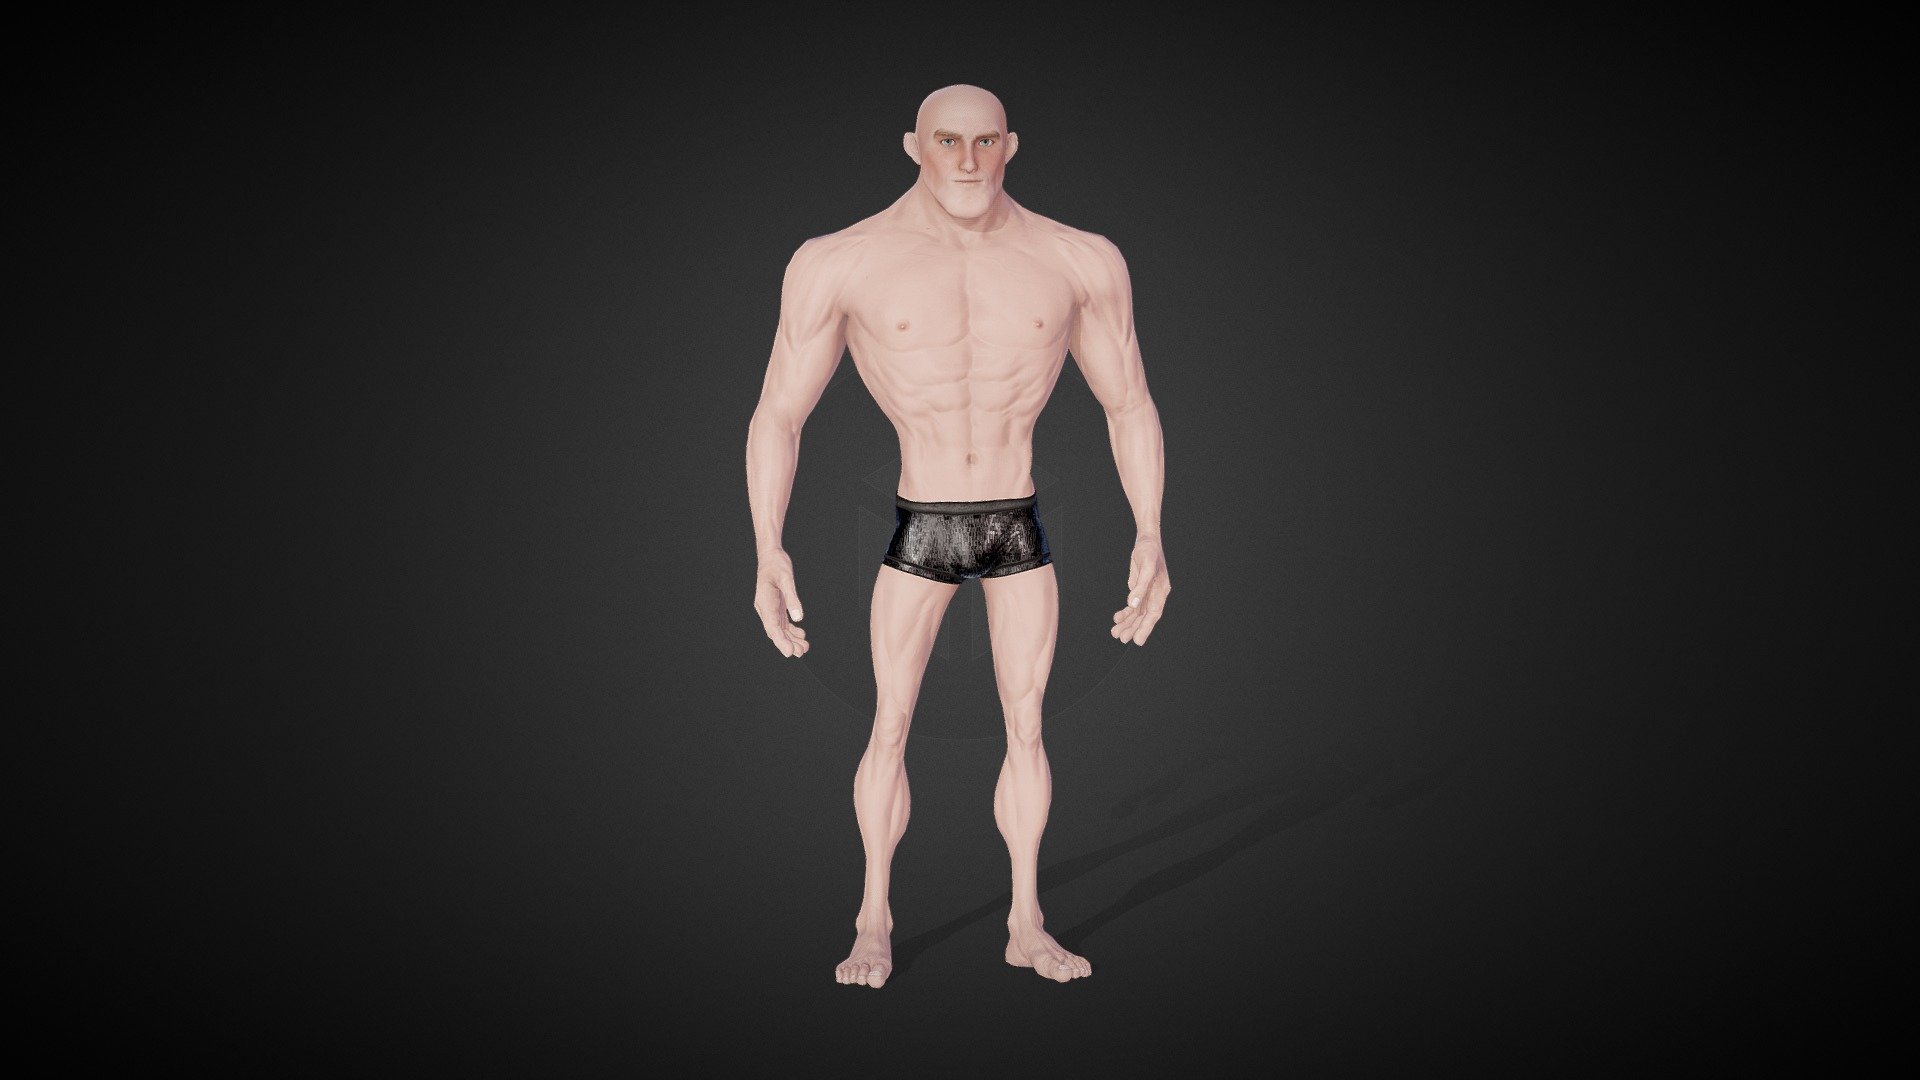 CC4 Max (CC1 character now remastered for Character Creator 4)

Find out more here:
https://marketplace.reallusion.com/cc4-stylized-base-combo-remastered

You are looking for characters for your project? Check out all my Character Creator assets here:
https://www.reallusion.com/contentstore/featureddeveloper/profile/#!/ToKoMotion/Character%20Creator - CC4 Max (CC1 Remastered) - 3D model by ToKoMotion 3d model